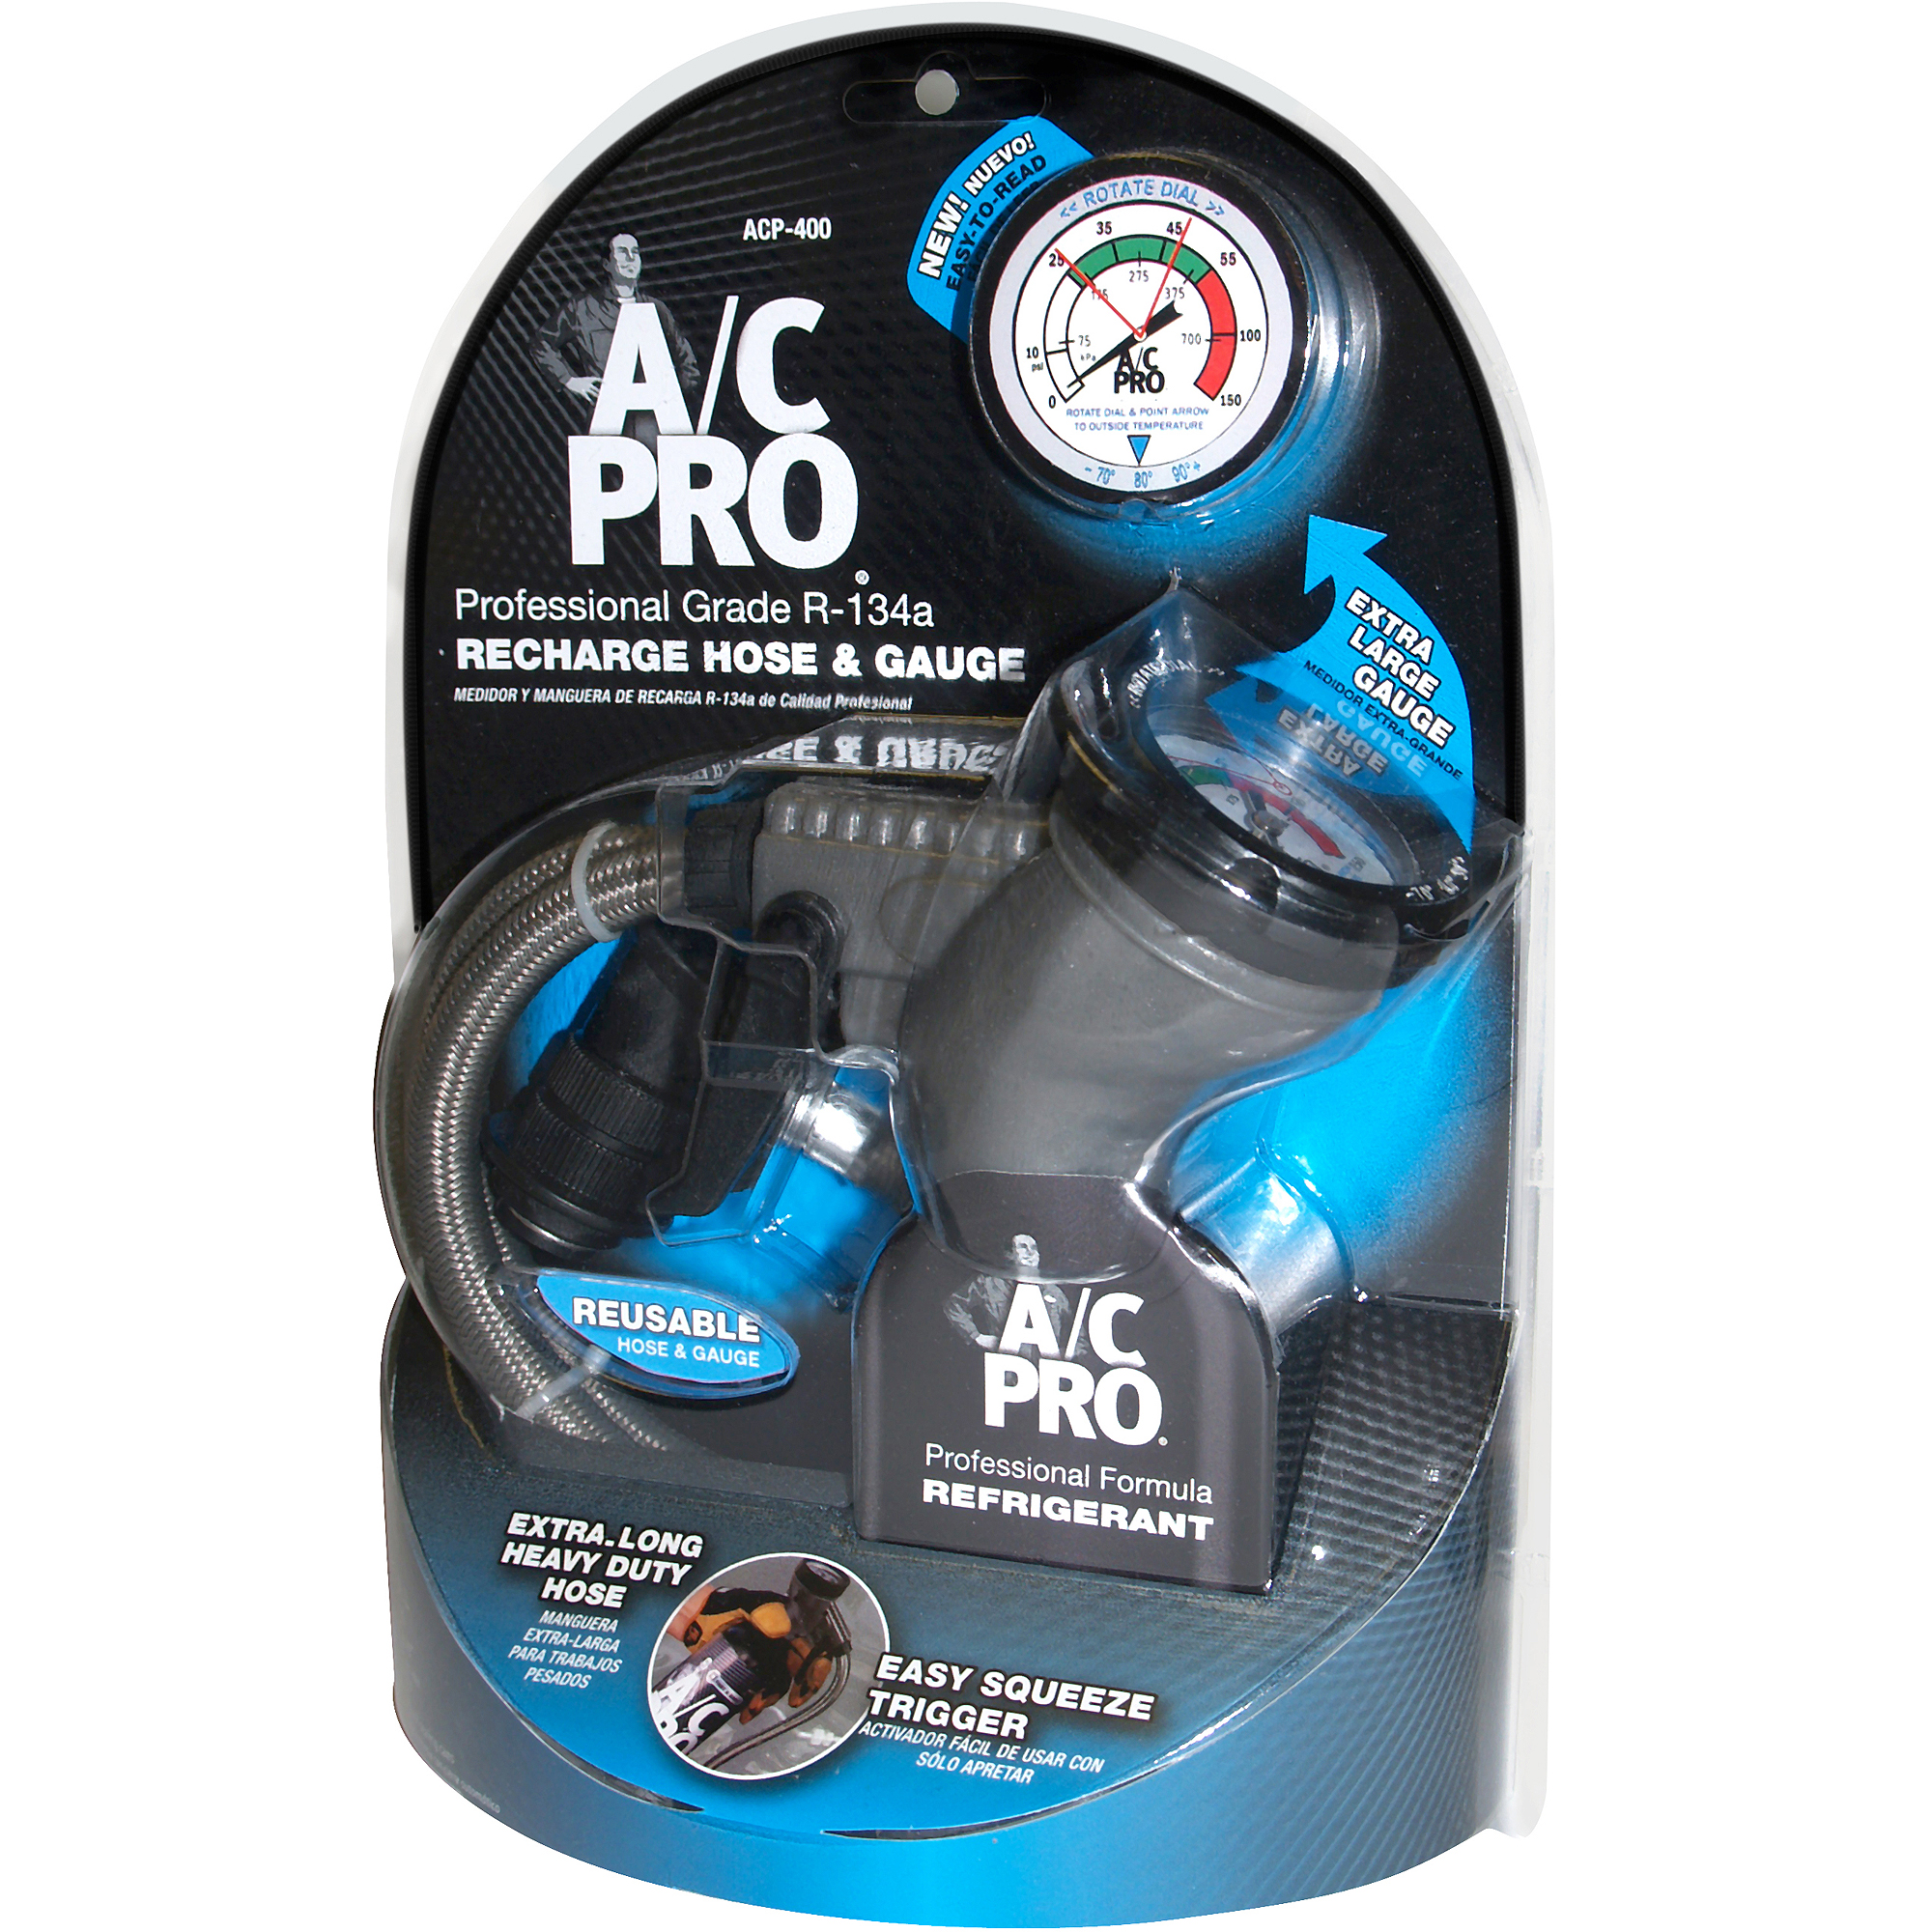 A/C Pro R-134A Professional Grade Recharge Hose and Gauge - image 1 of 3